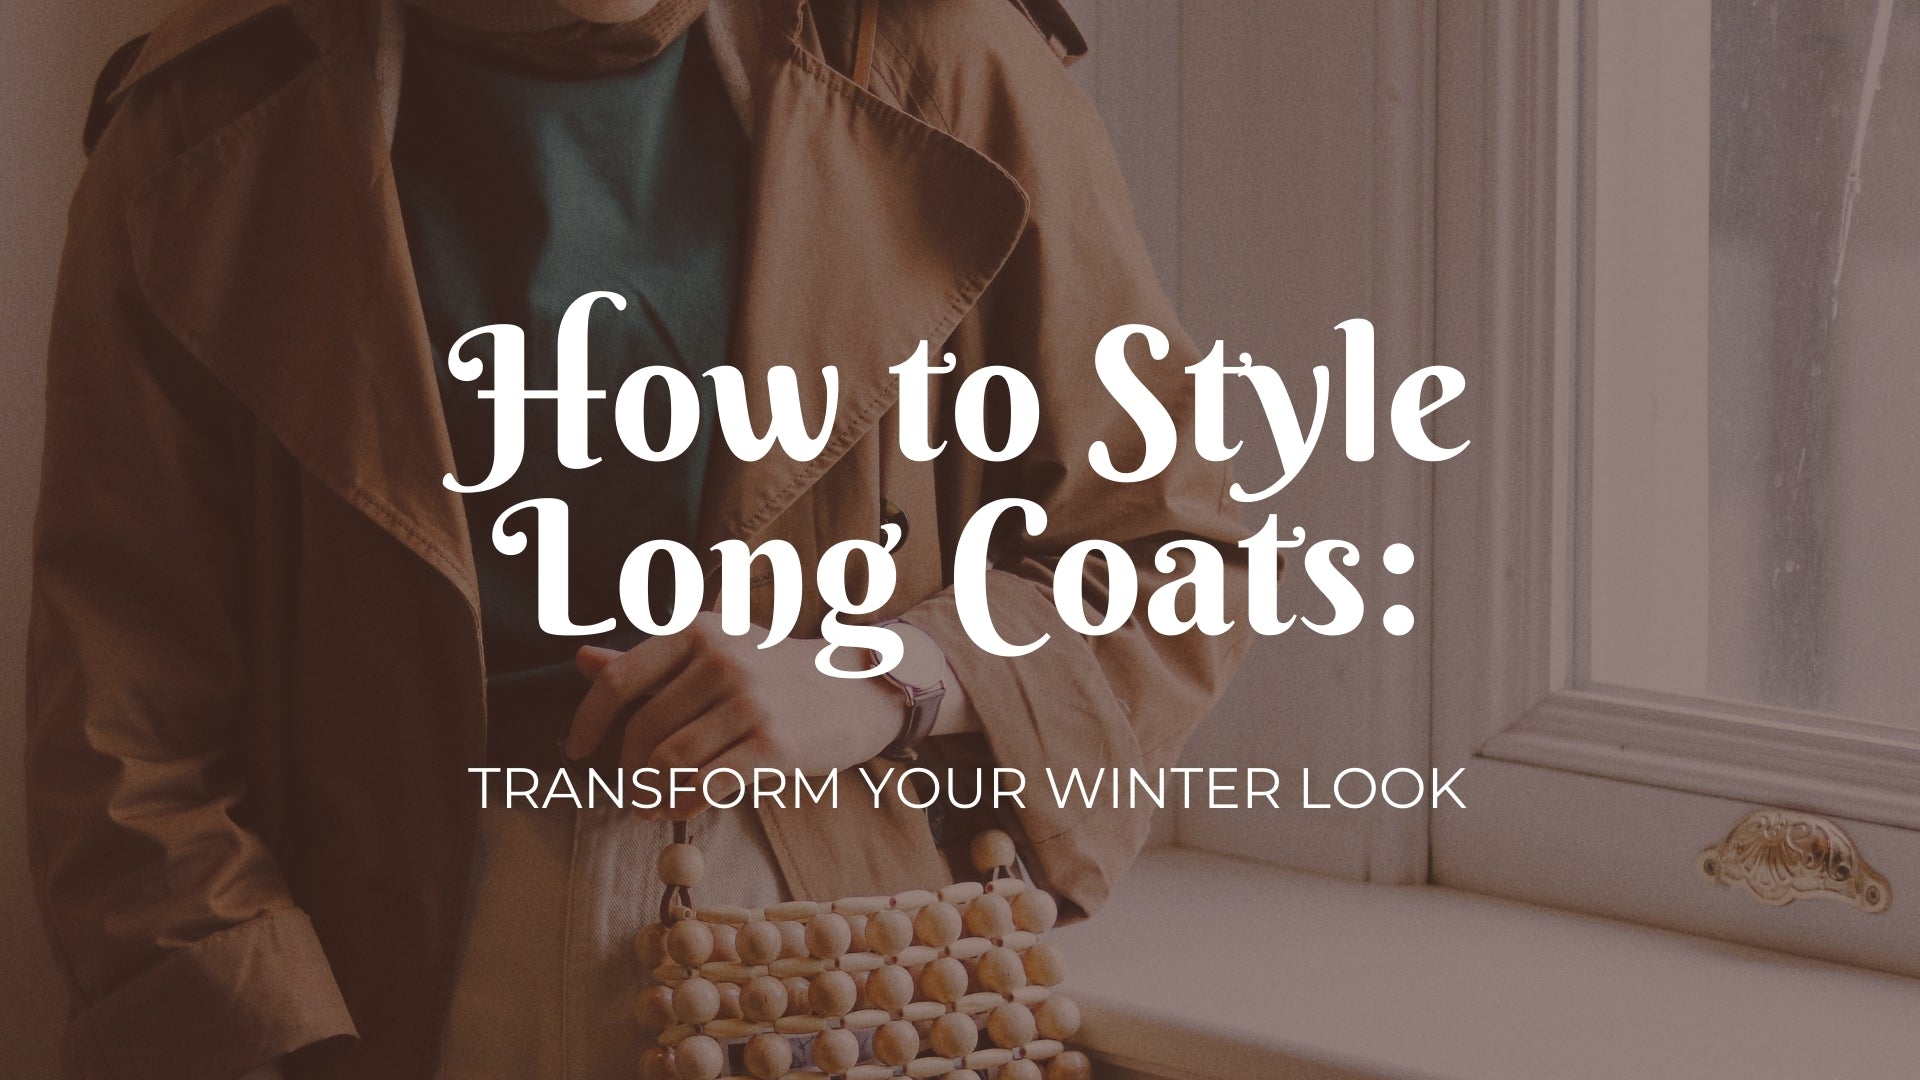 How to style long coats